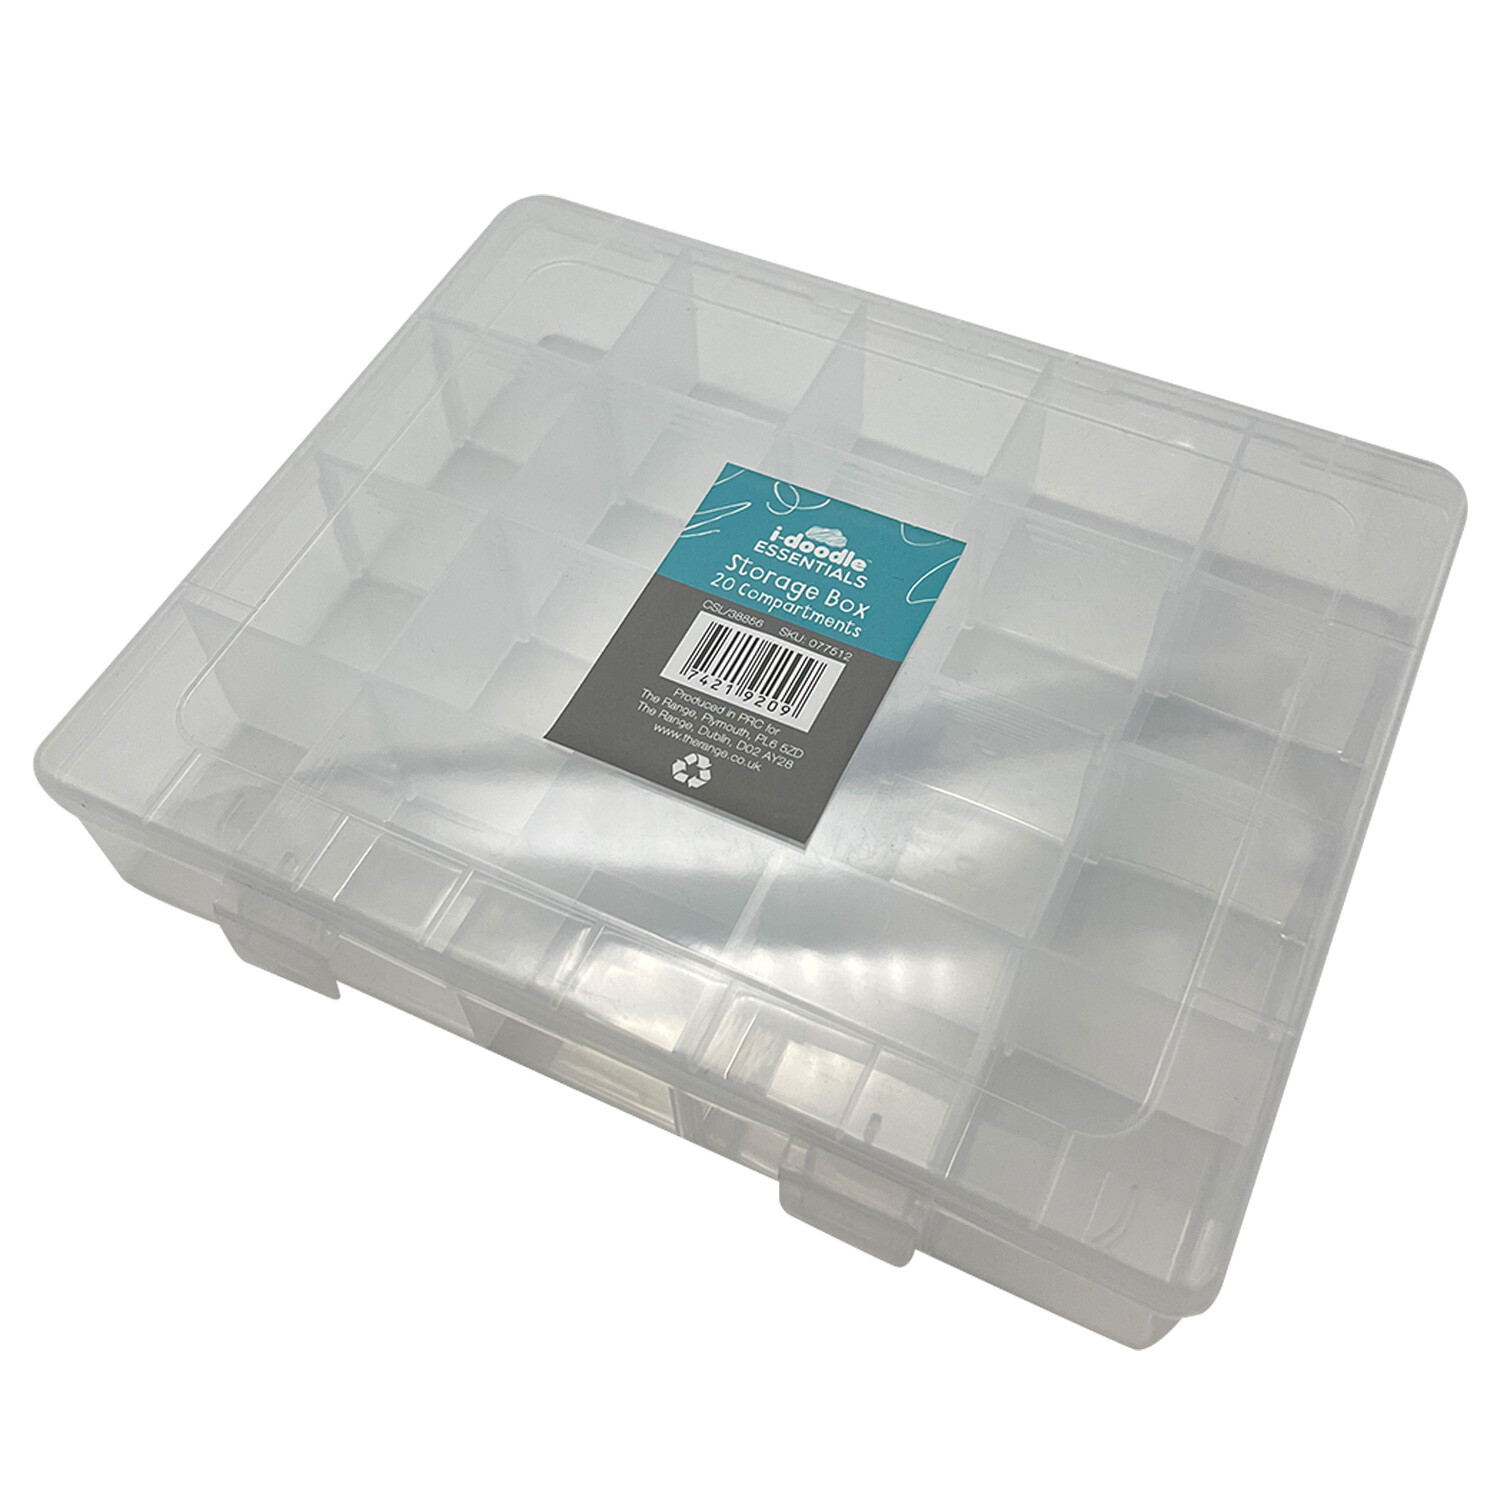 Compartment Storage Box - Clear / 20 Compartments Image 4